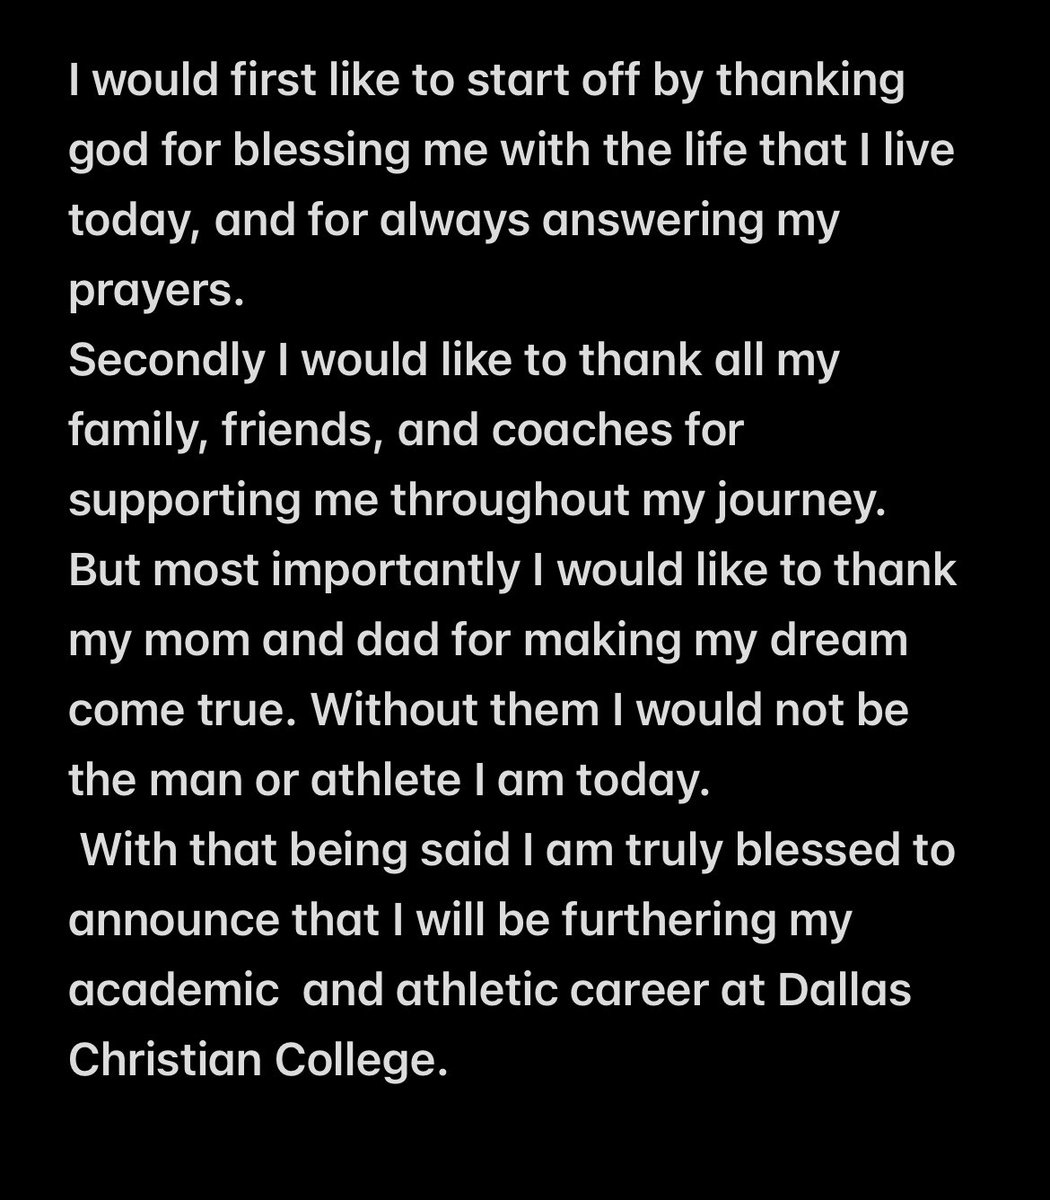 100% Committed Thank you to everyone that has been apart of this journey🖤❤️ #committed @DCCBaseball2010 @VmhsPatriotBsB